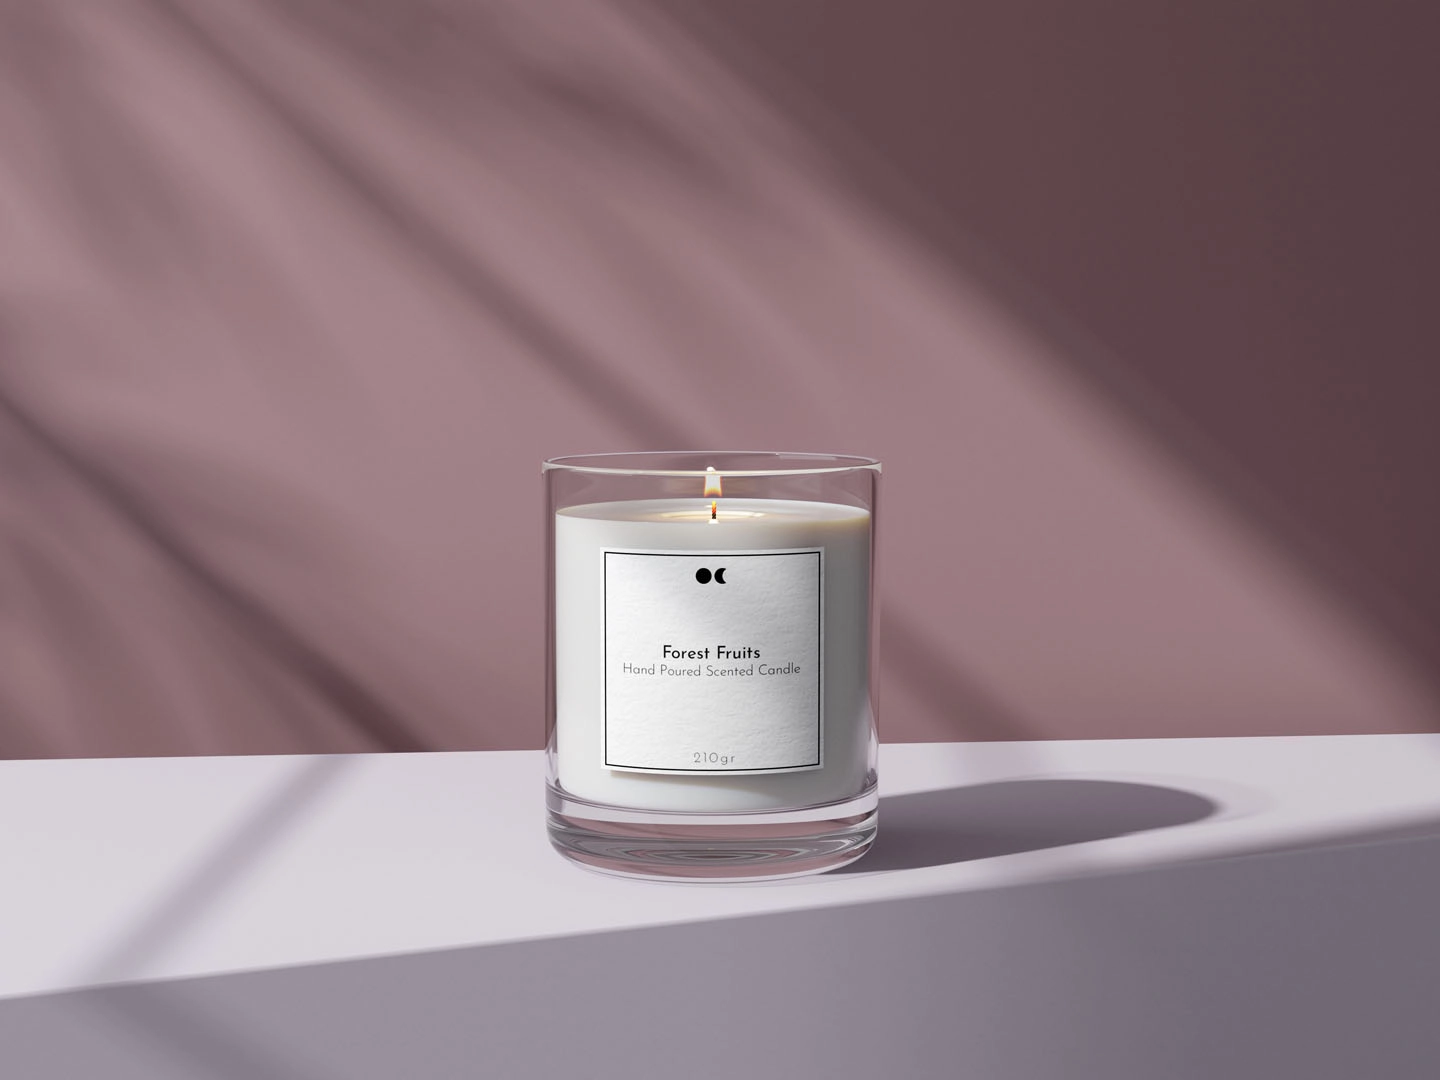 Scented candle in a - Lumond - jar Fruits Forest